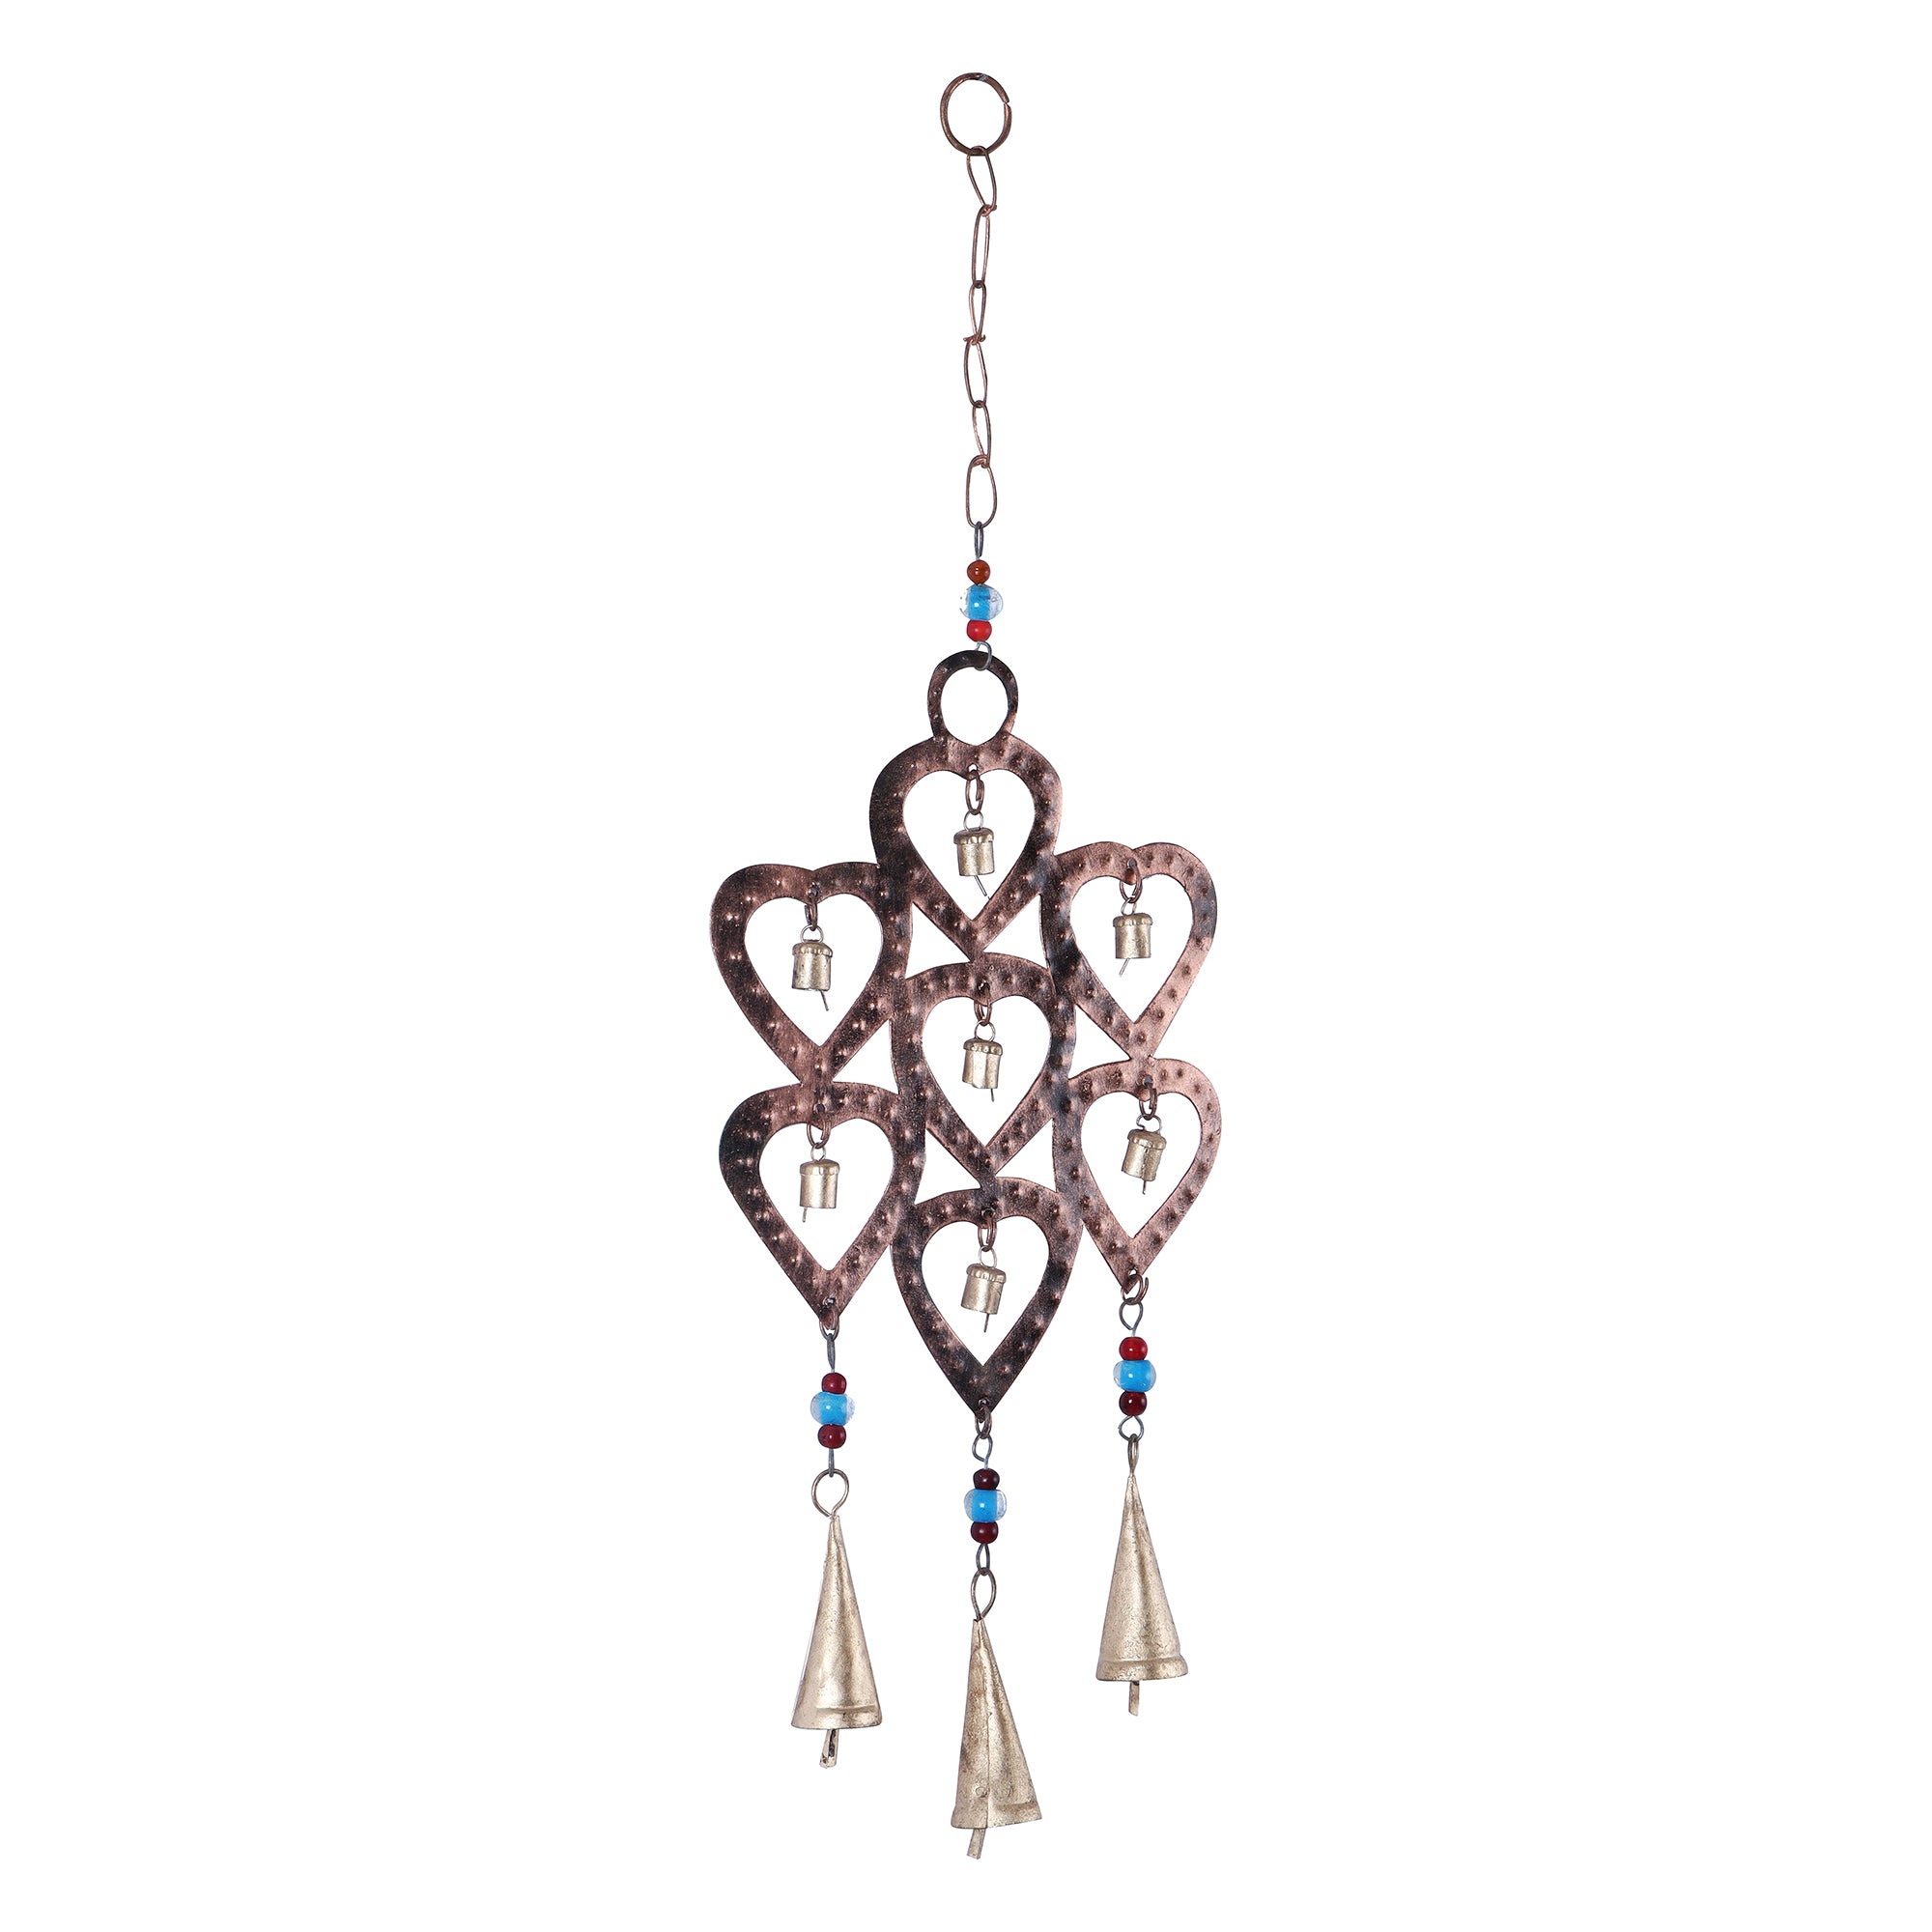 The Little Hearts Wind Chime